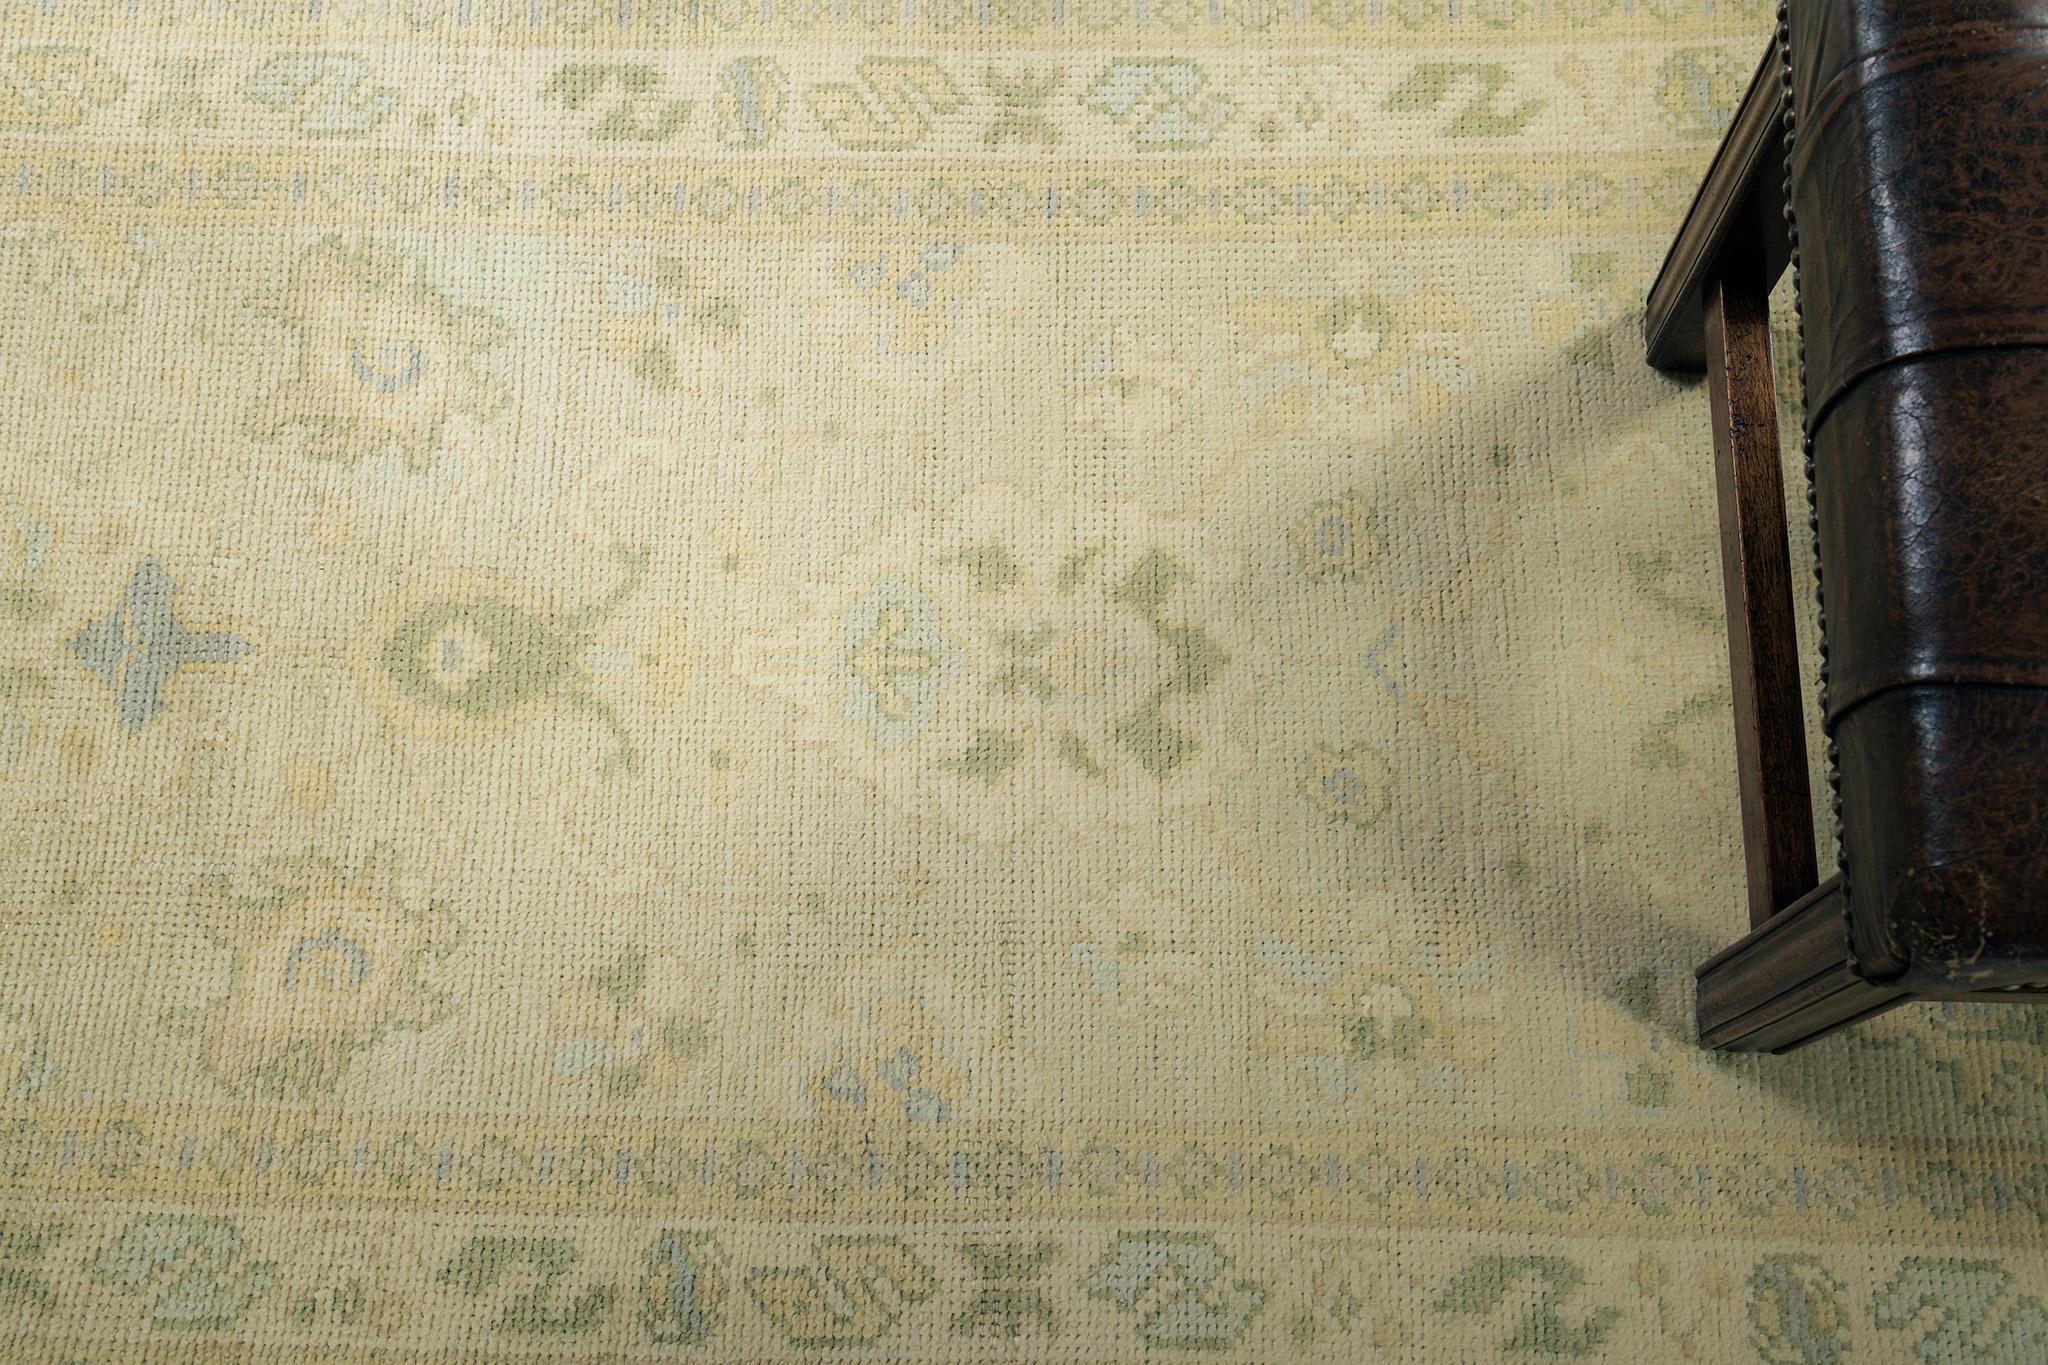 The design accentuates a notable medallion enclosed by patterned motifs. Gold, yellow accents, some shades of blue, and green ornaments predominate in this revival of the Turkish Oushak runner. Adding this masterpiece to your collection will surely